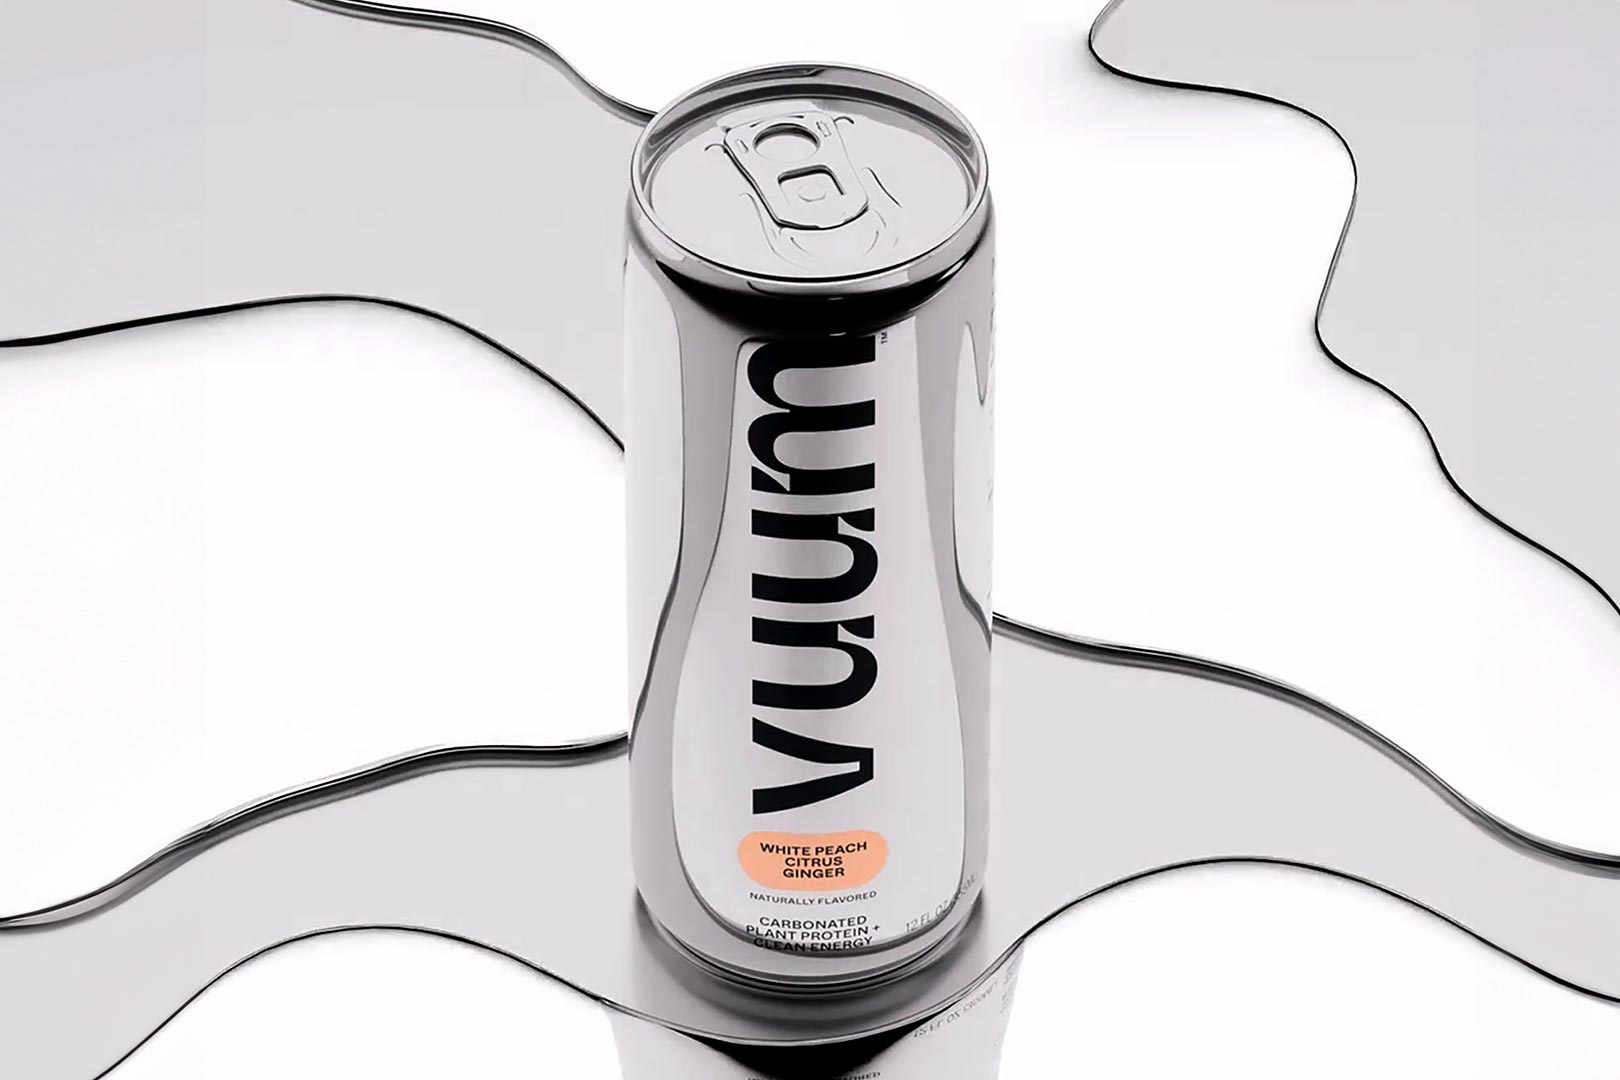 VUUM makes a naturally caffeinated energy drink that also has 10g of plant protein